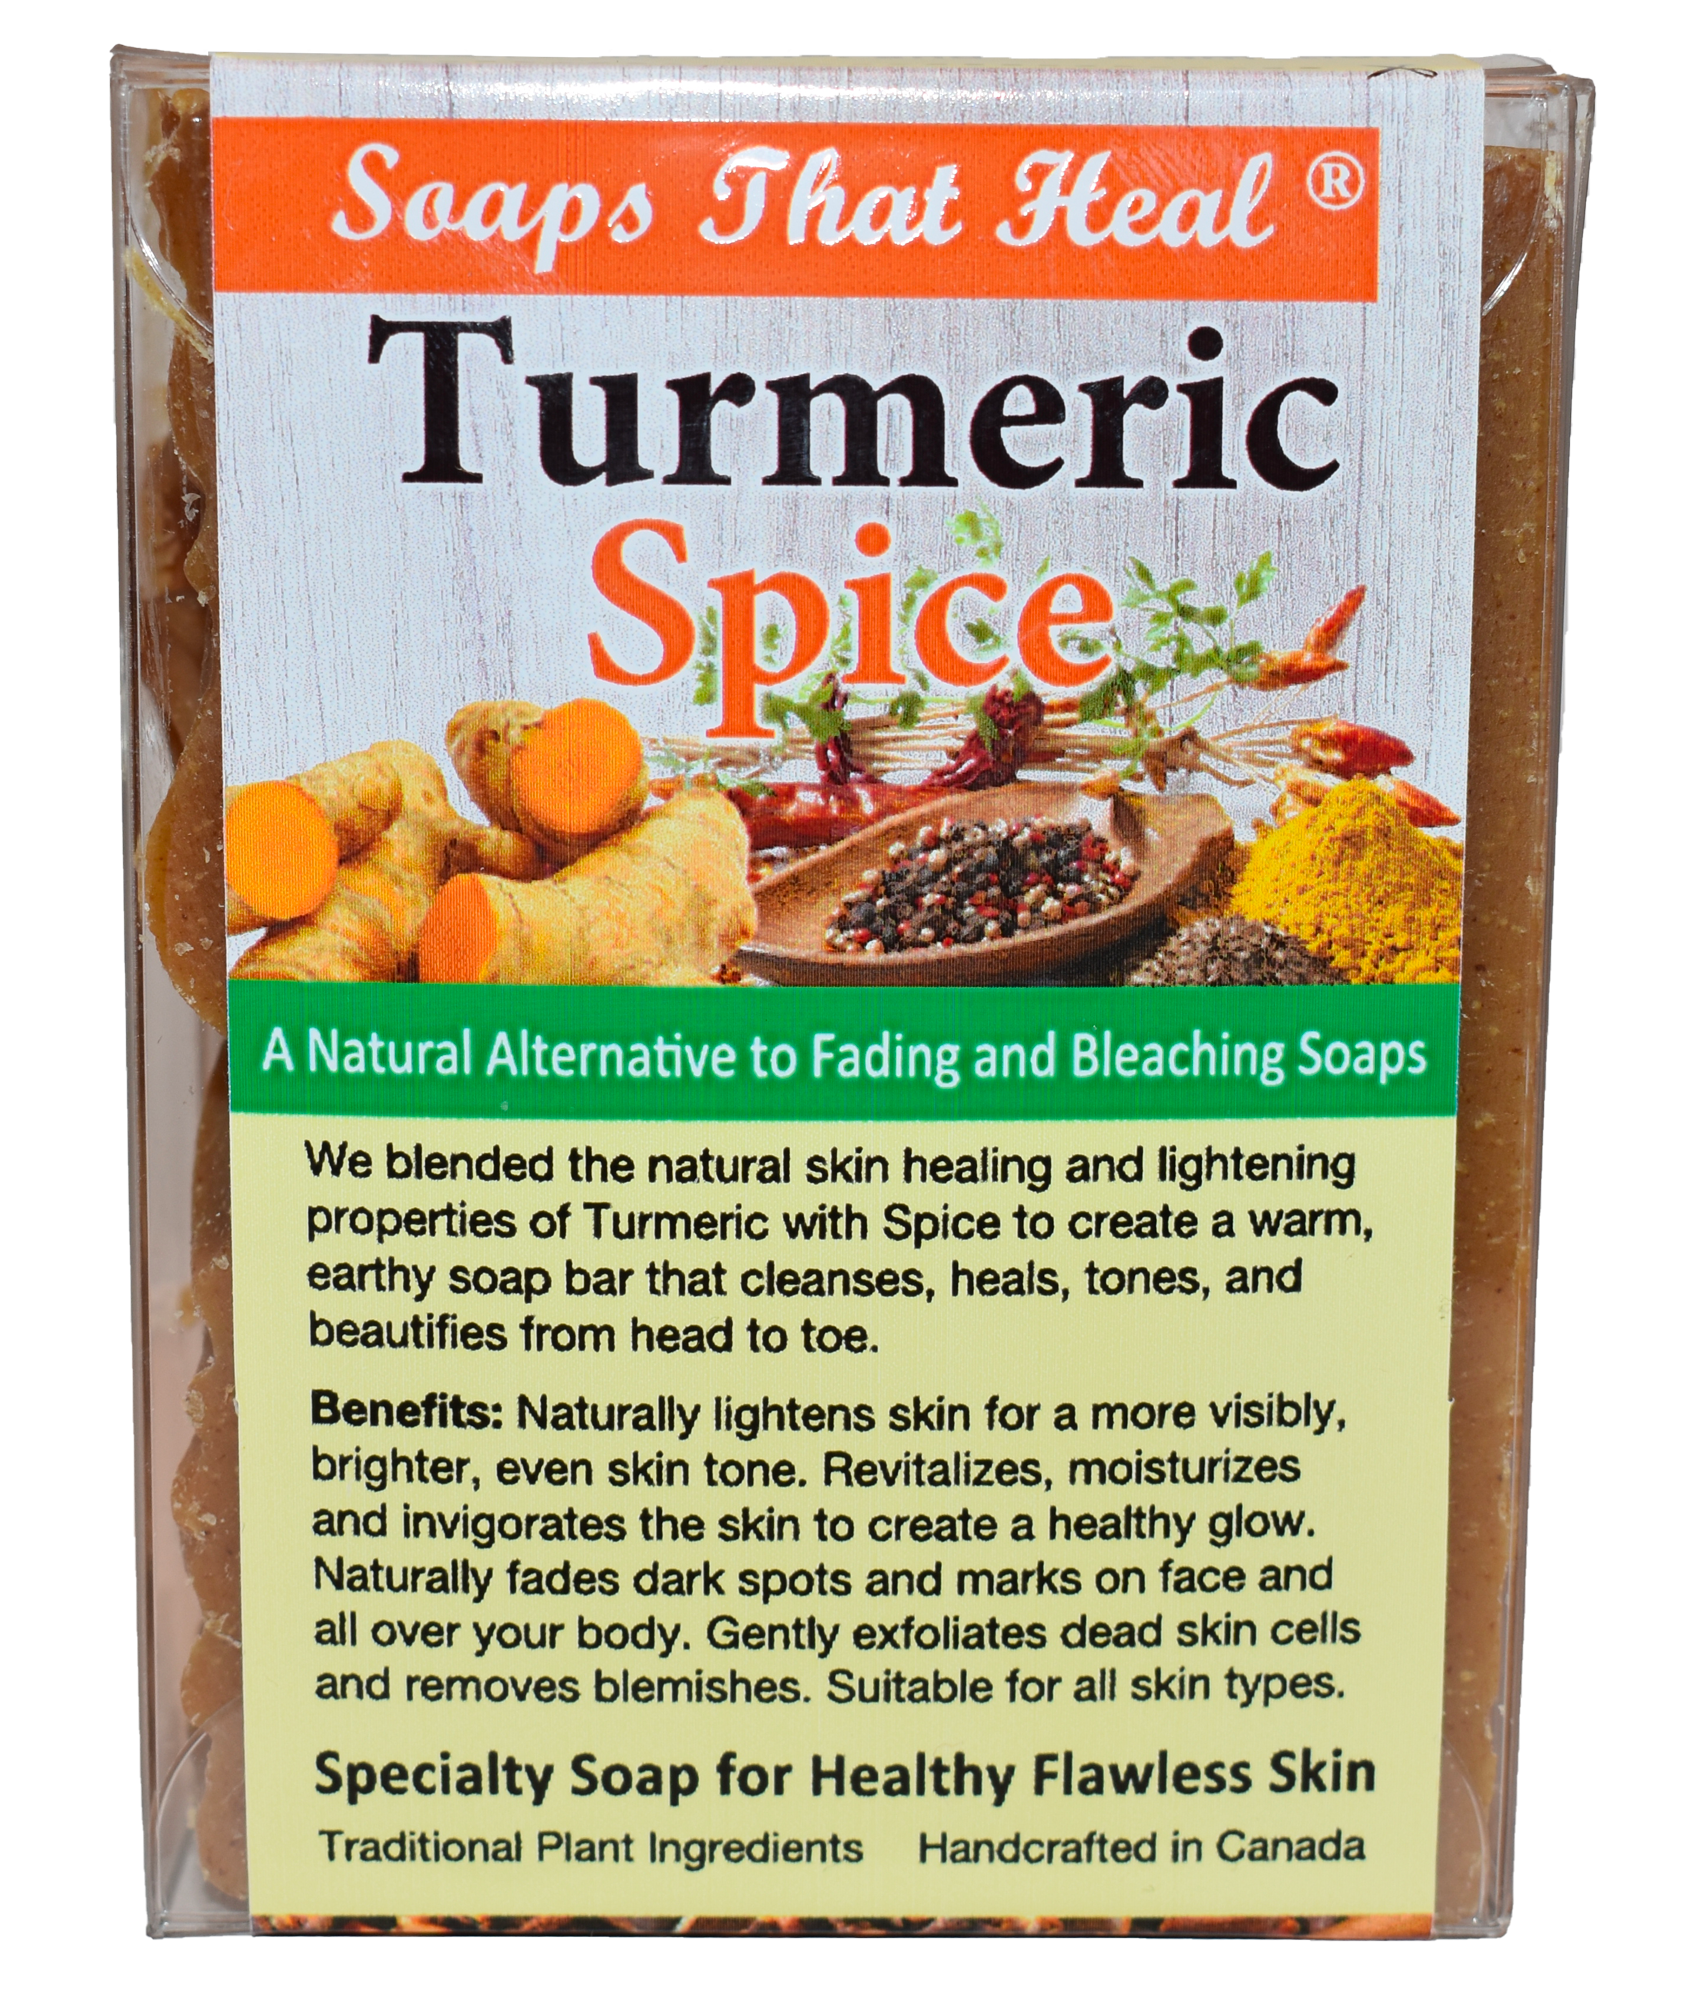 Soaps That Heal  Turmeric Spice Natural Lightening Bar for Severe Facial Hyperpigmentation and Problem Skin  A natural remedy for facial hyperpigmentation. Enriched with turmeric and spices, it works to diminish dark spots, revealing a more radiant and evenly-toned complexion